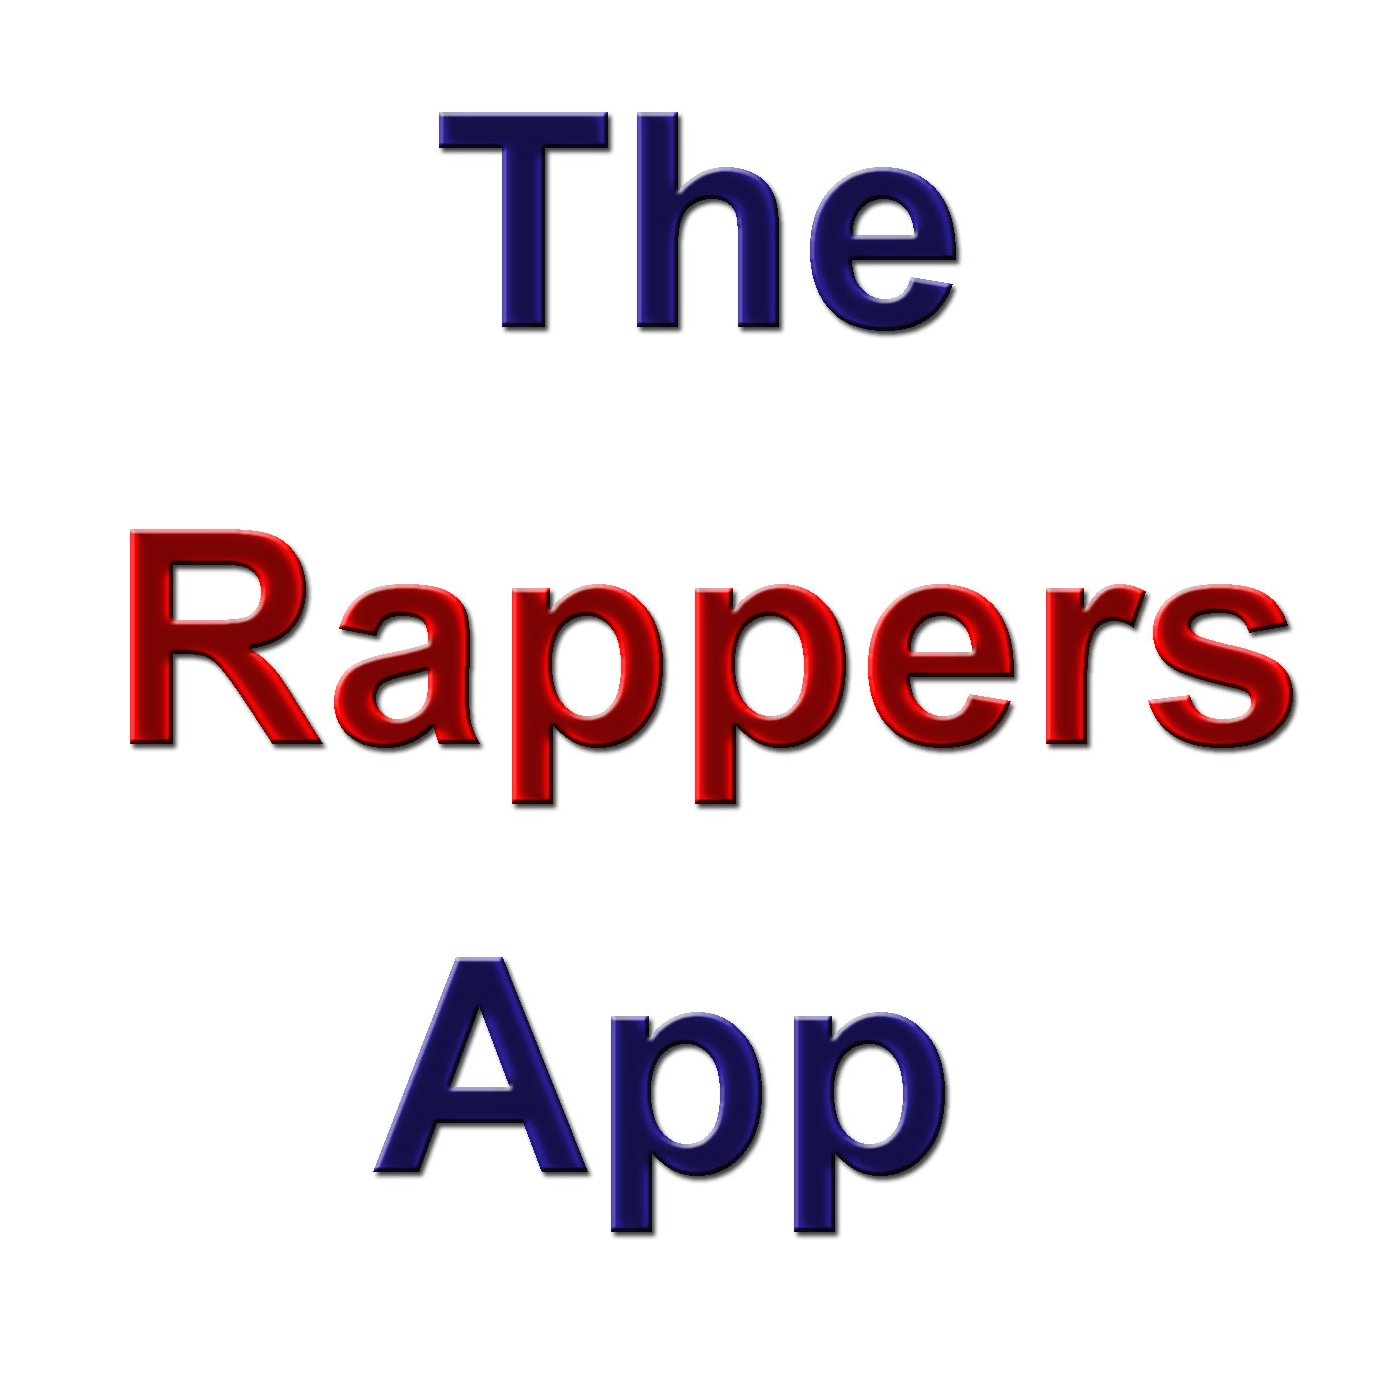 The Rappers App provides the best music for independent, unsigned, and underground artists of all styles. https://t.co/pbjFjnsTZ6